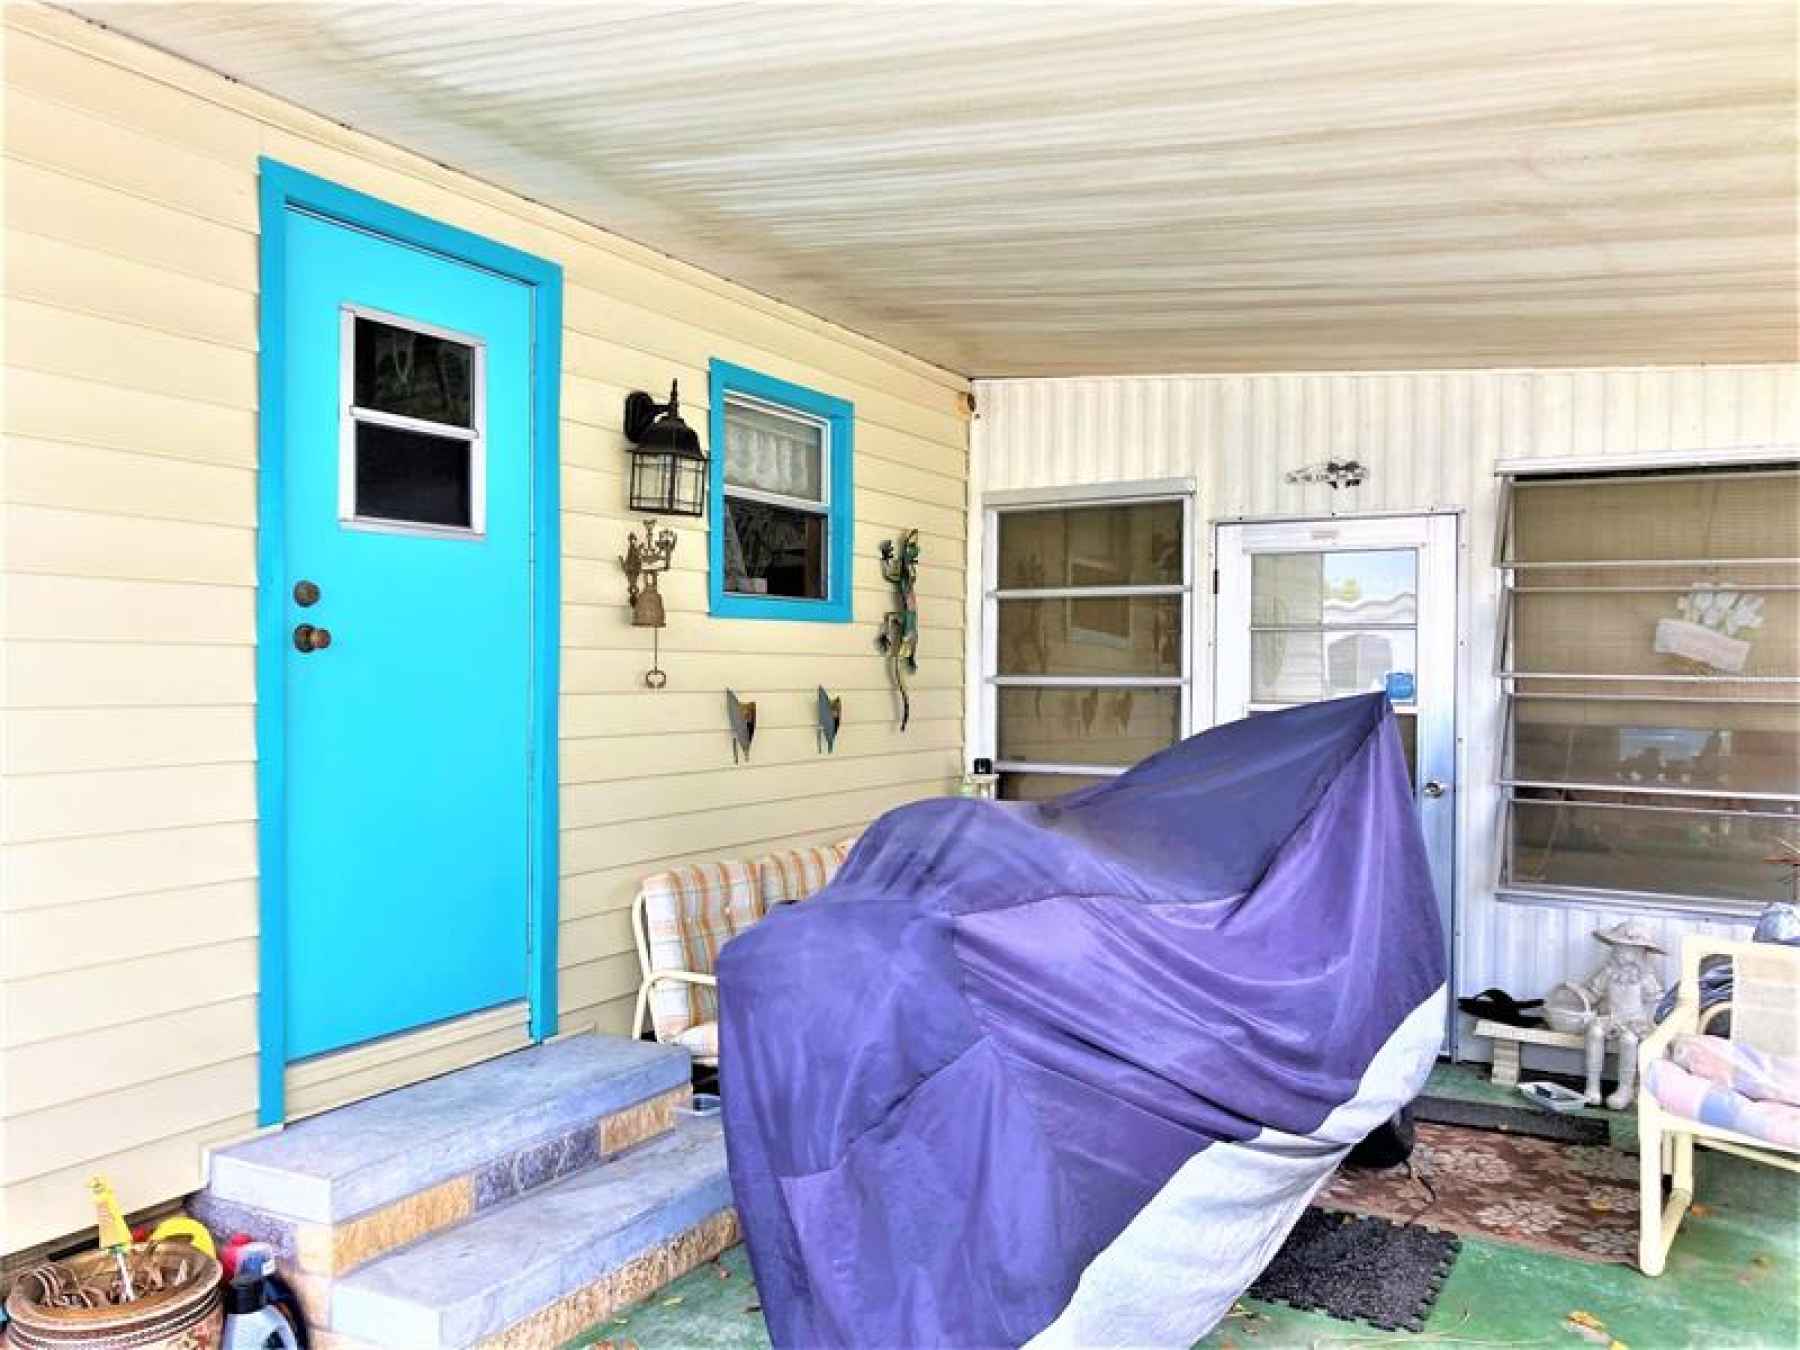 Entry_Under_Covered_Carport